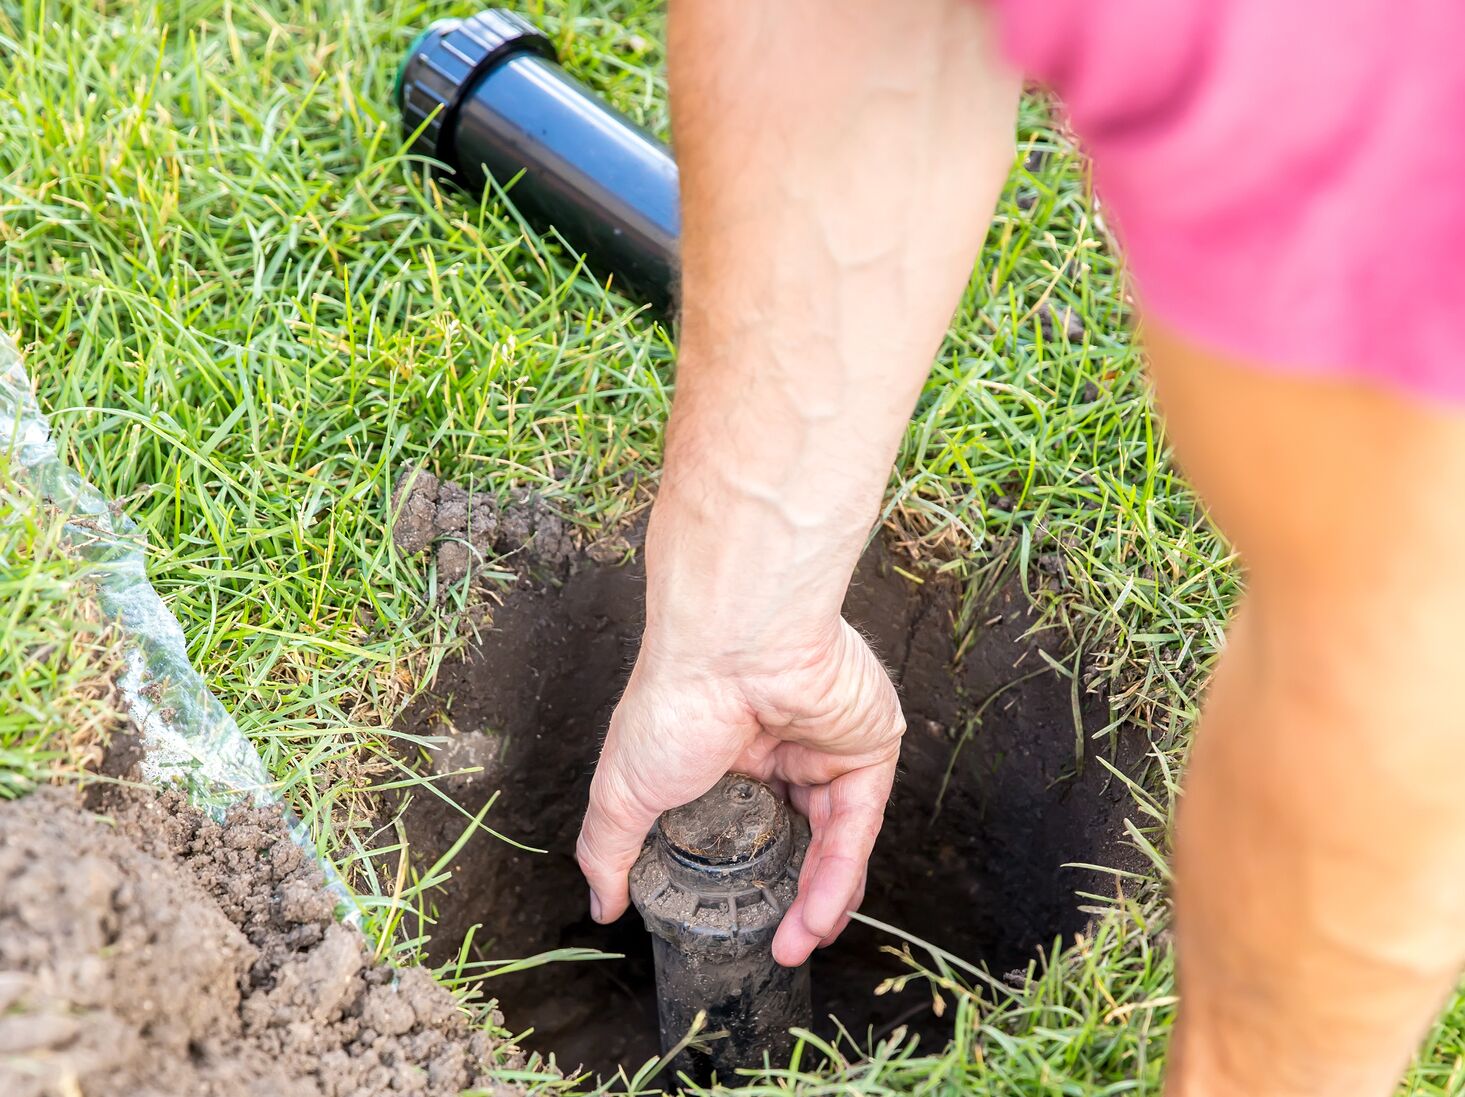 Lawn Sprinkler System Installation: How to Install a Lawn Sprinkler System